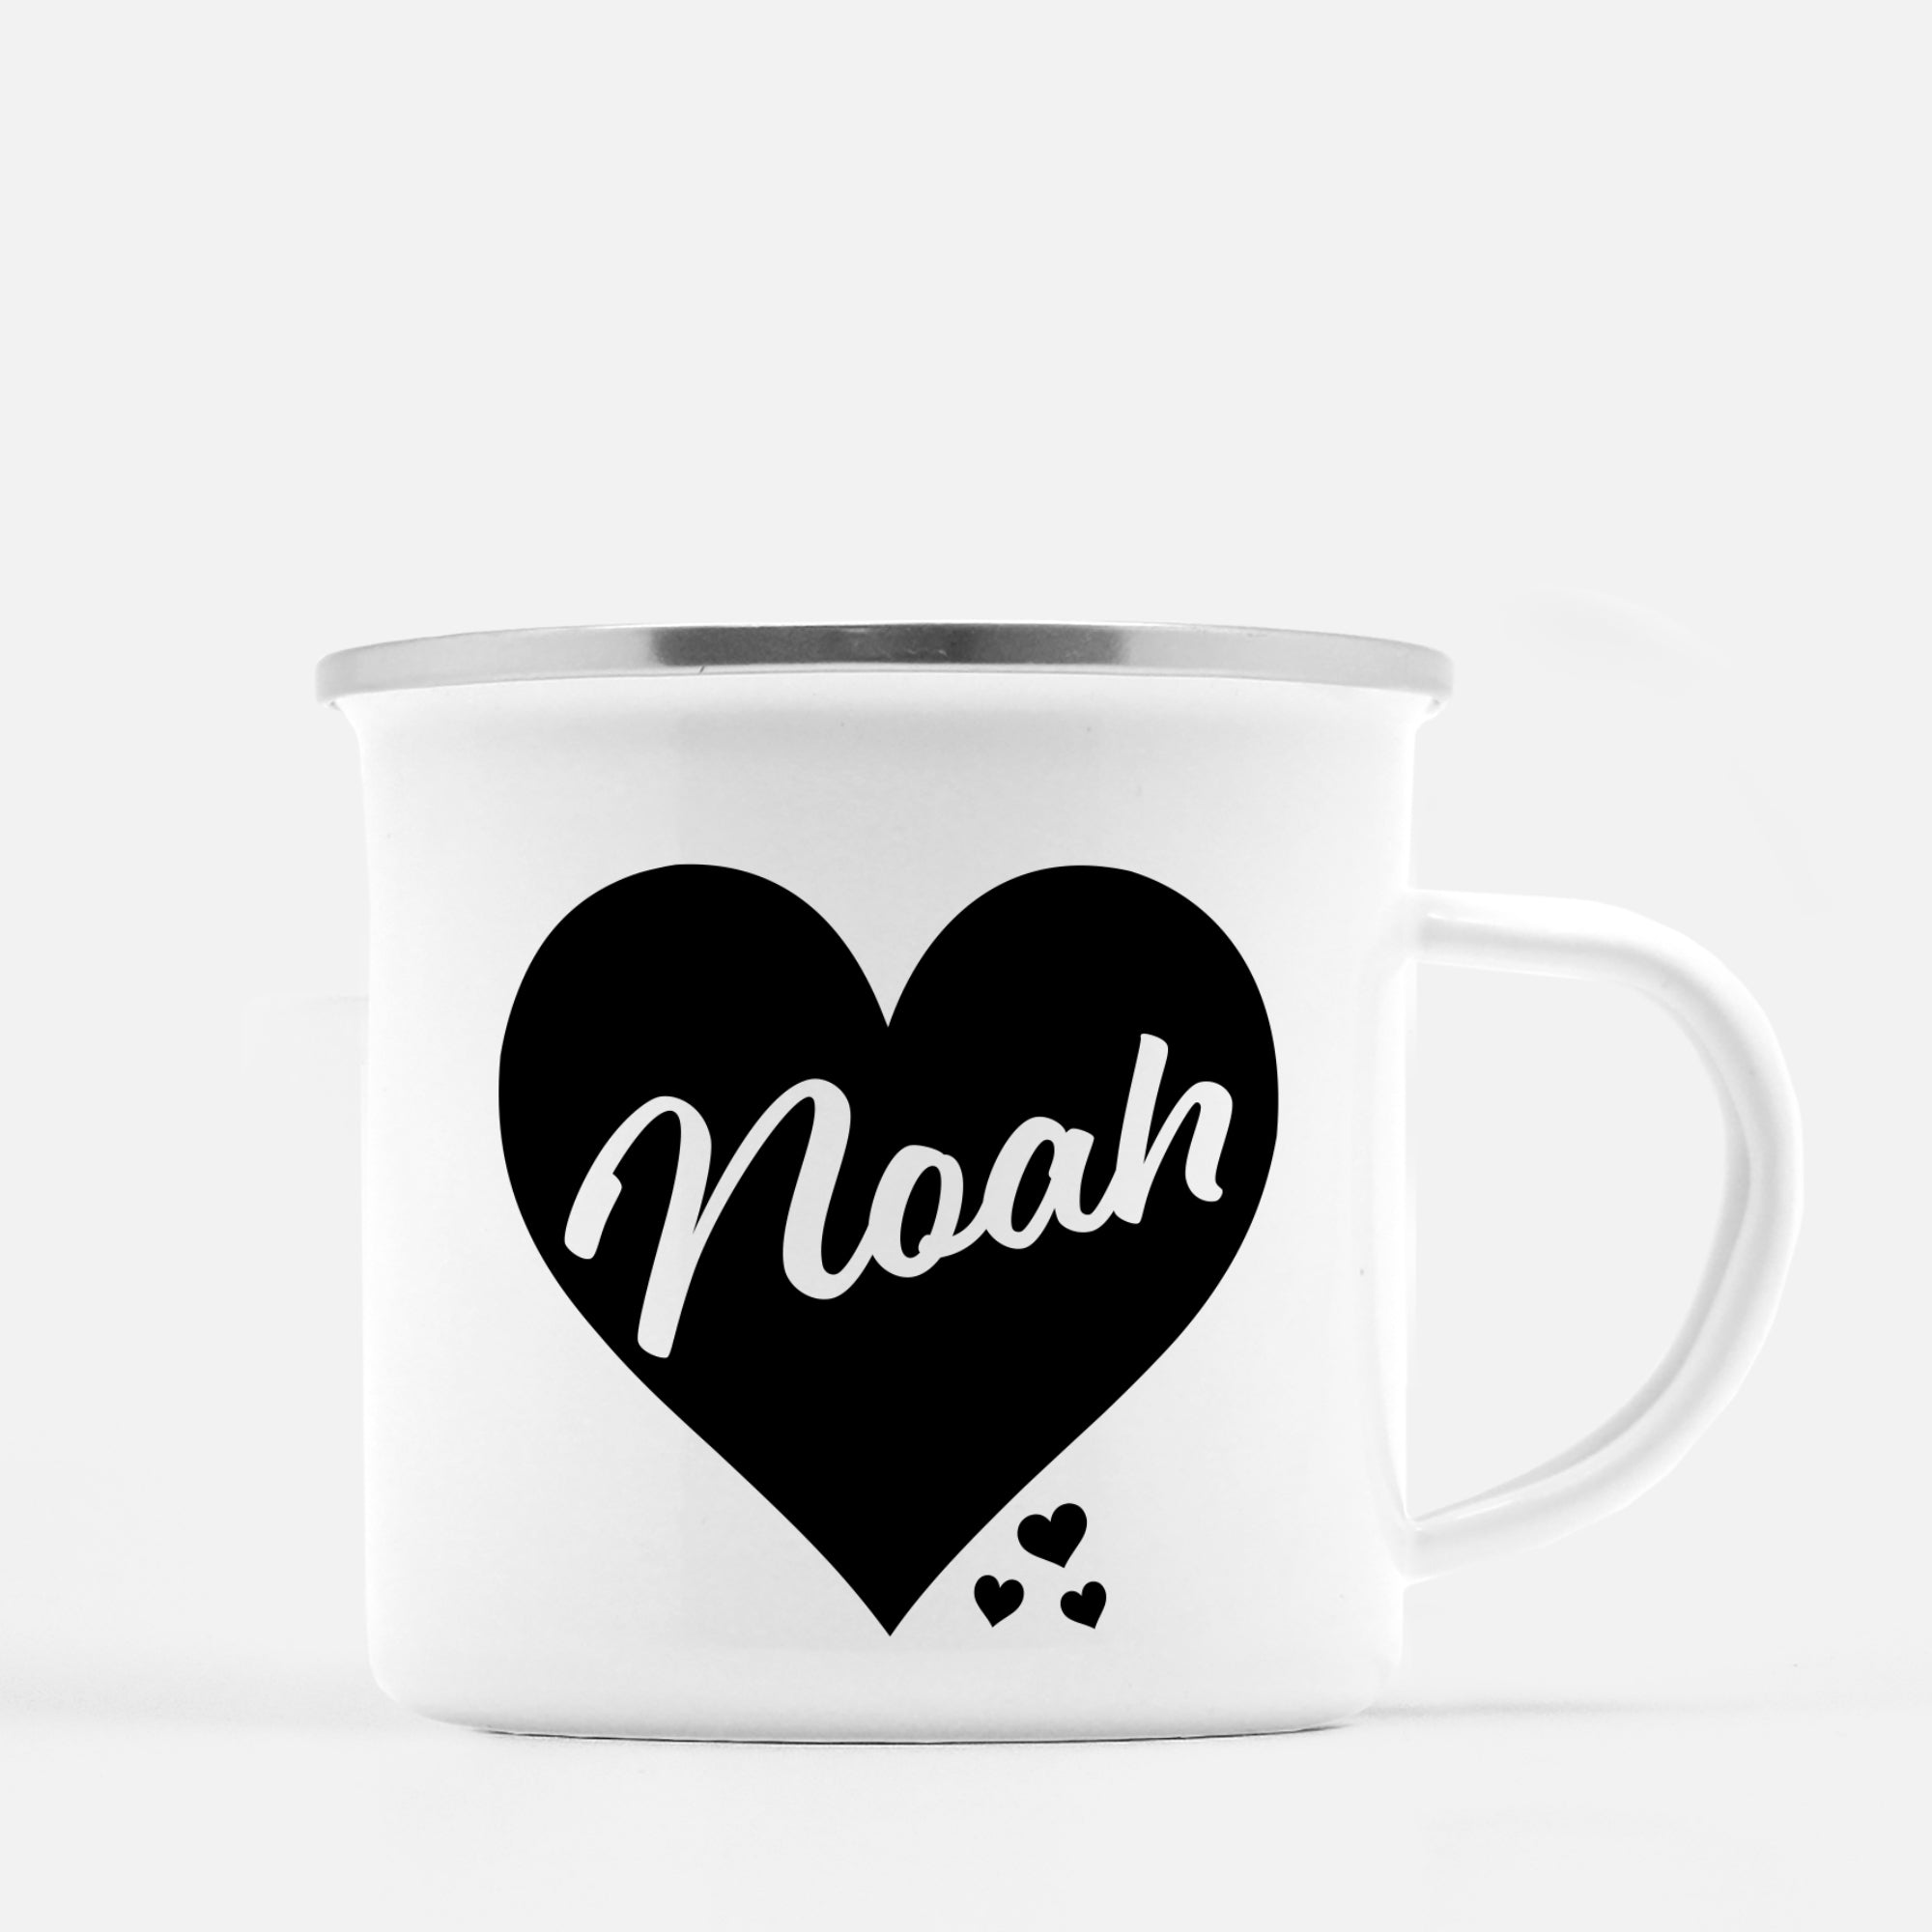 White enamel 12 oz metal camp mug with silver lip | Big Heart - Black | Personalized with child's name | Valentine's Day gift